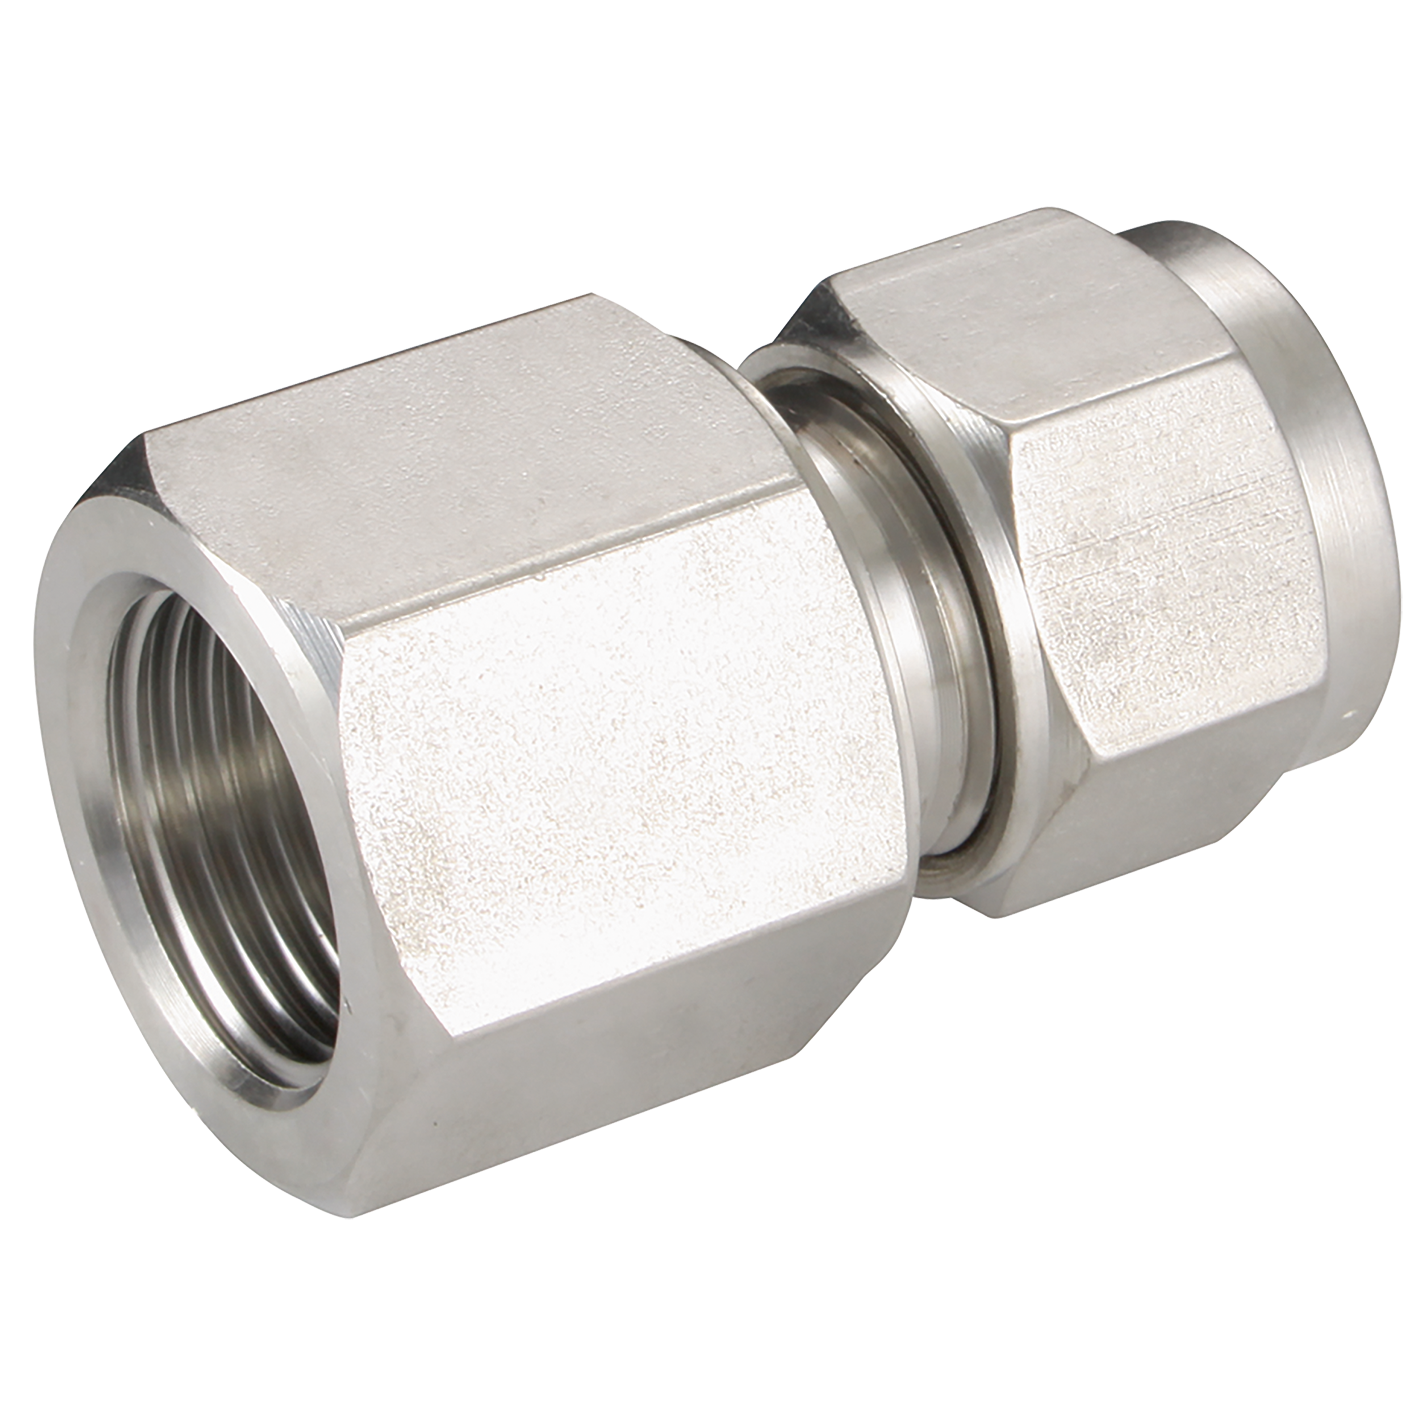 FEMALE ISO CONNECTOR 1/4 OD 1/2 BSPT